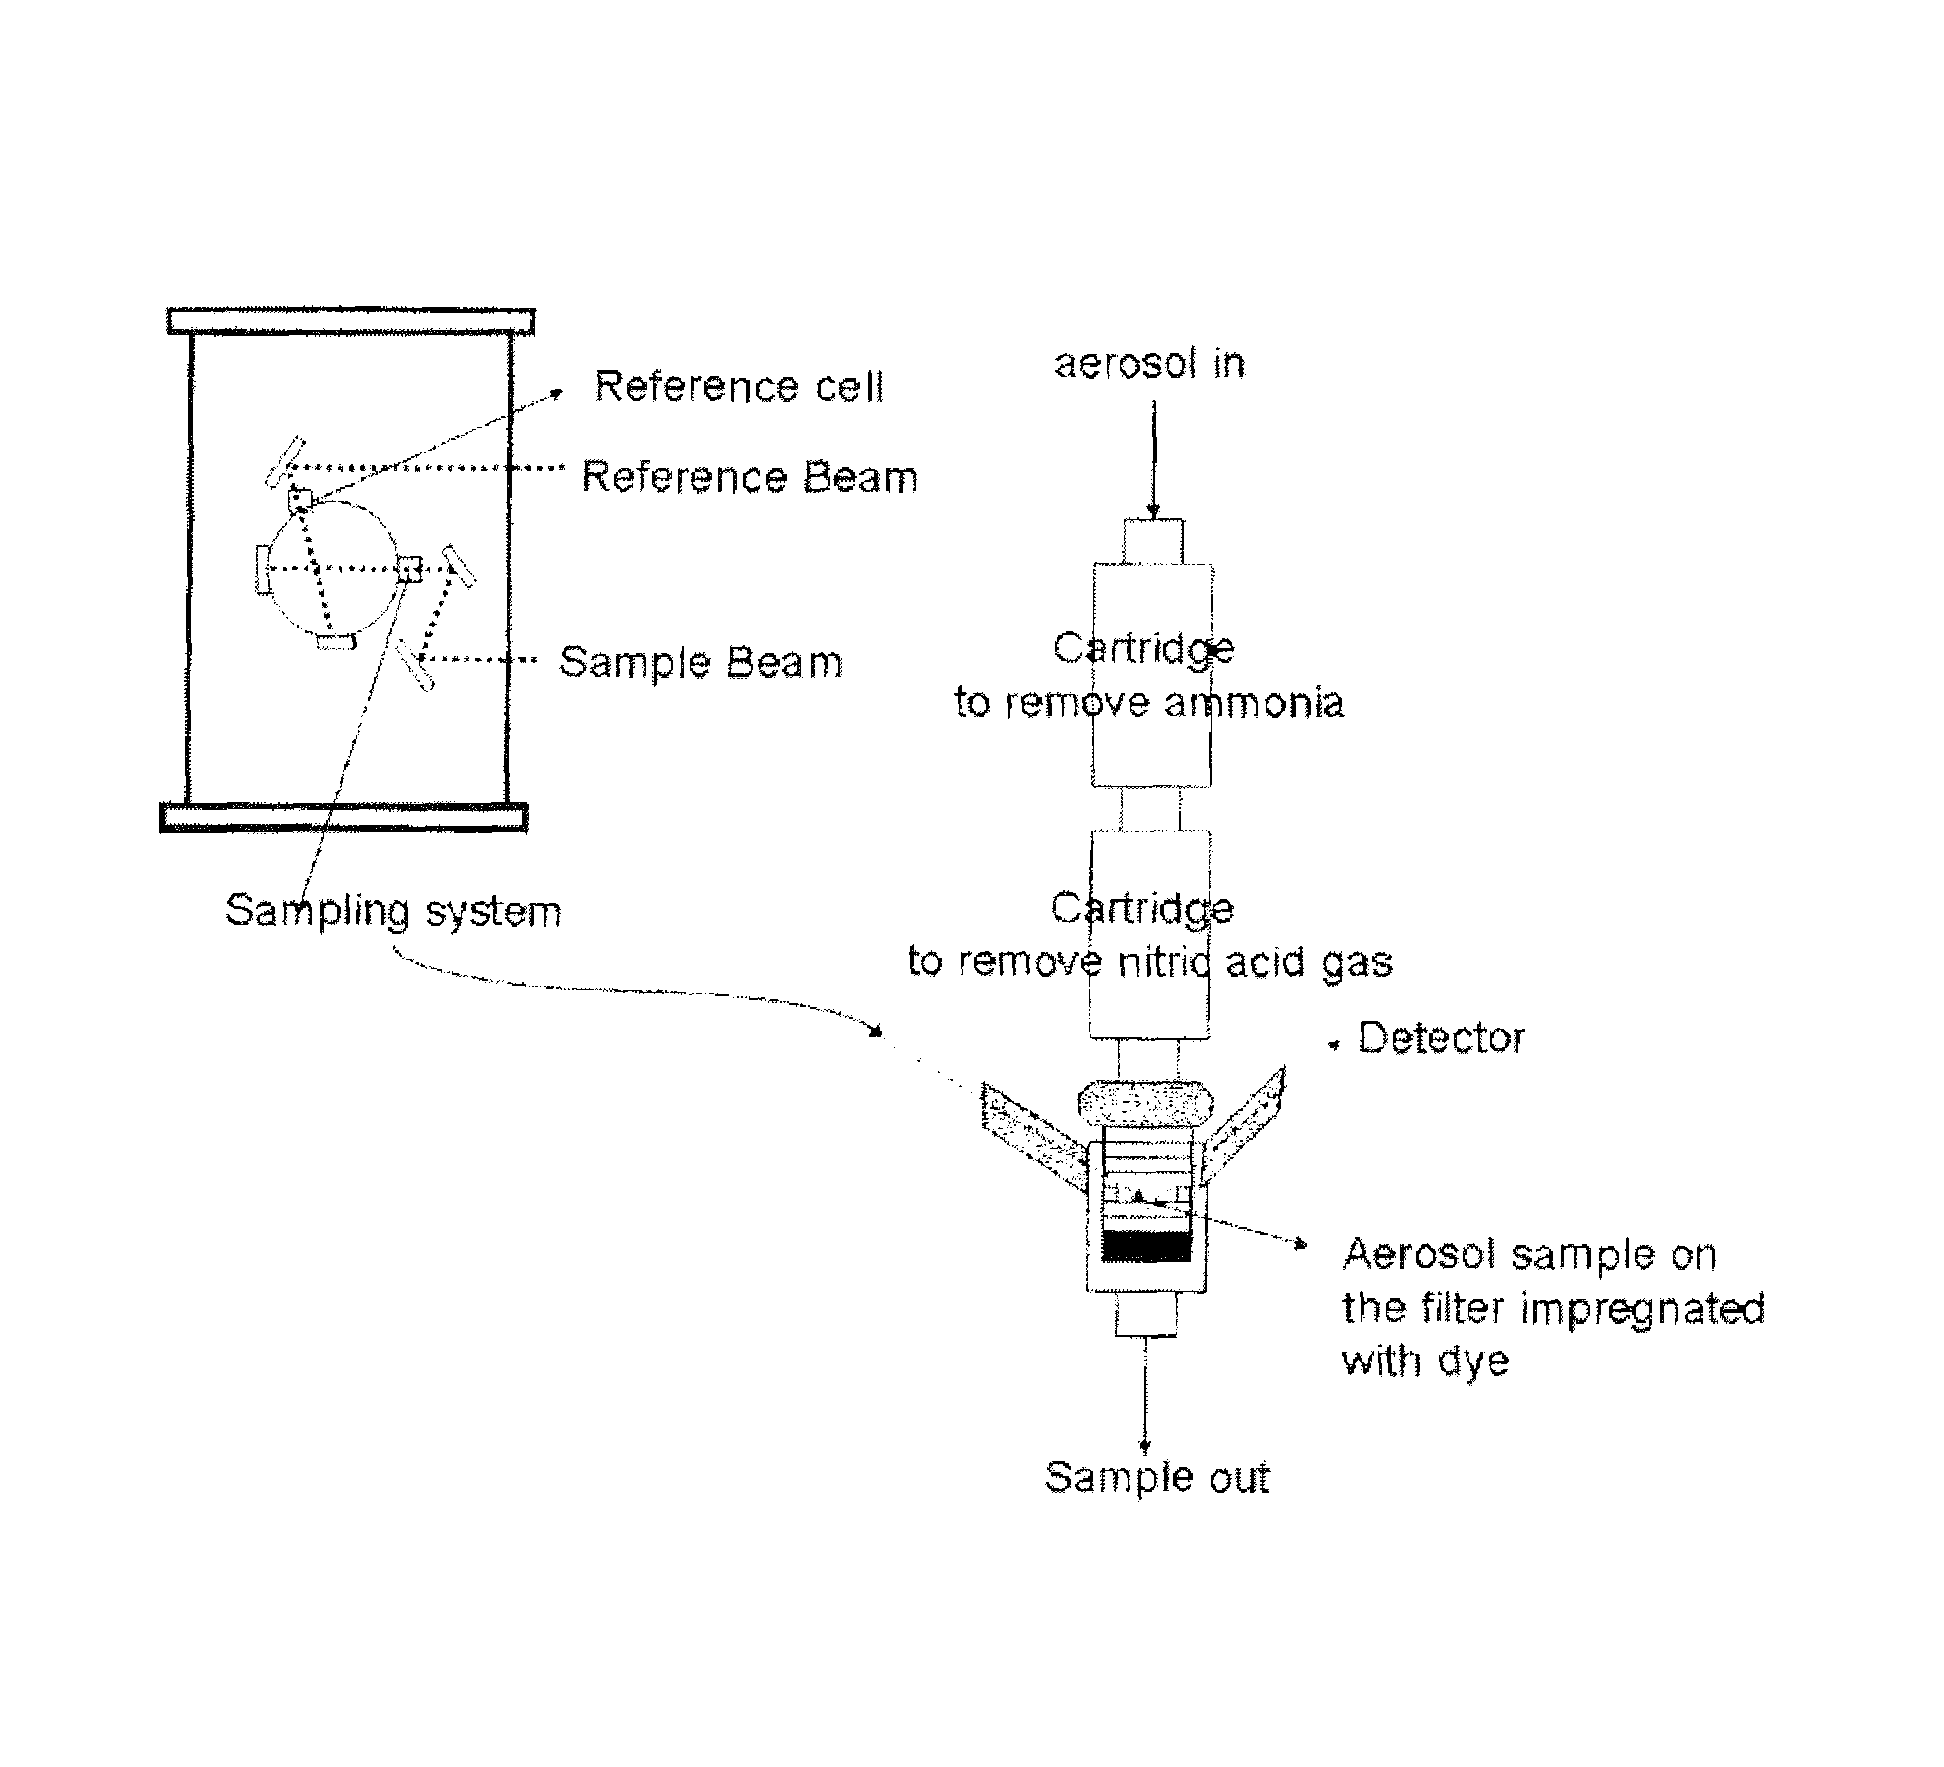 Devices and methods for measuring the acidity of airborne matter using UV-visible spectrometry